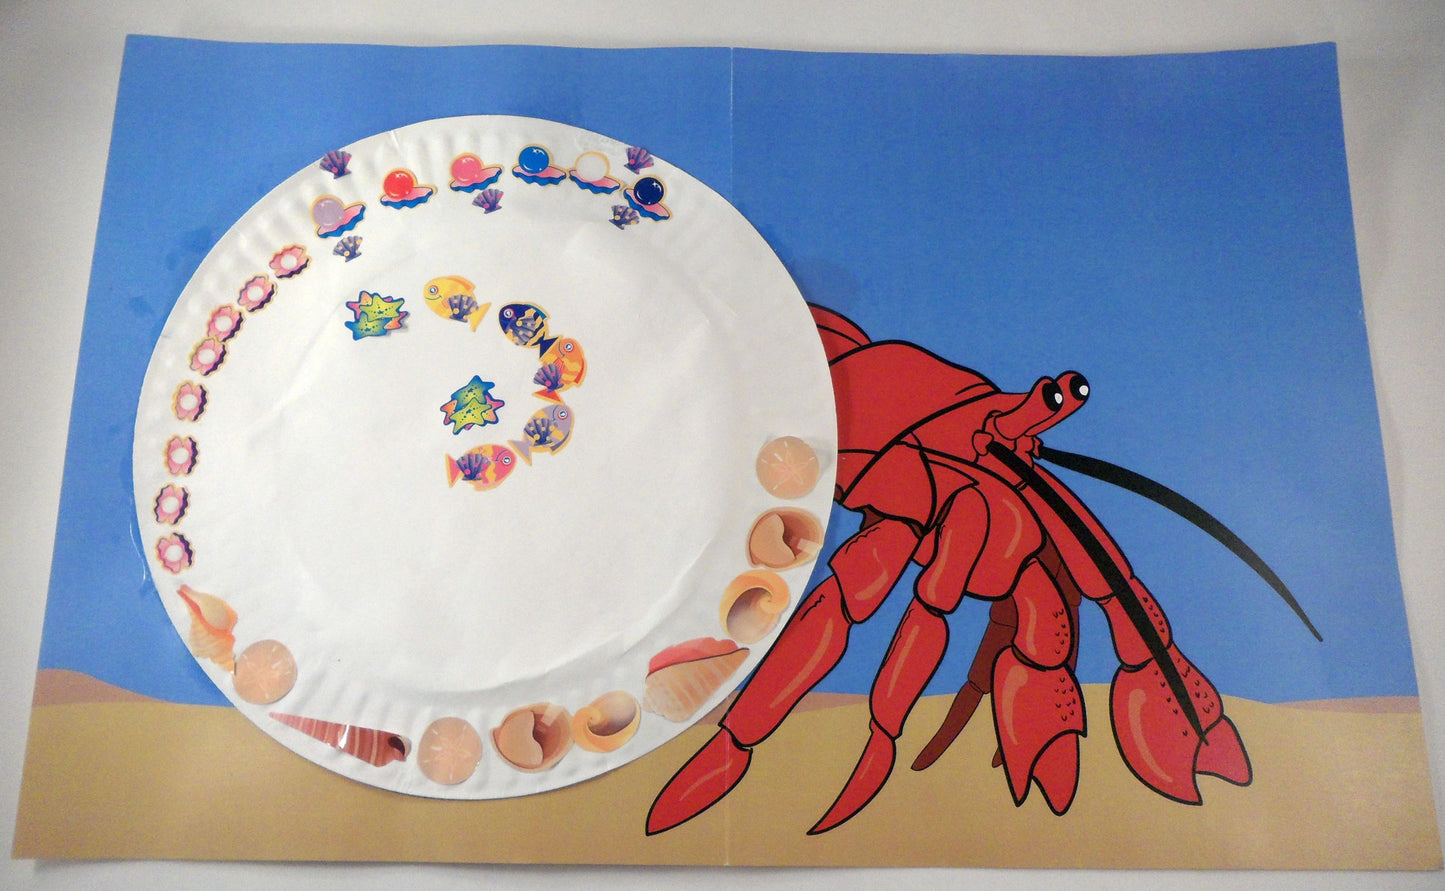 A decorated shell. A House for Hermit Crab - Ivy Kids subscription box activities.